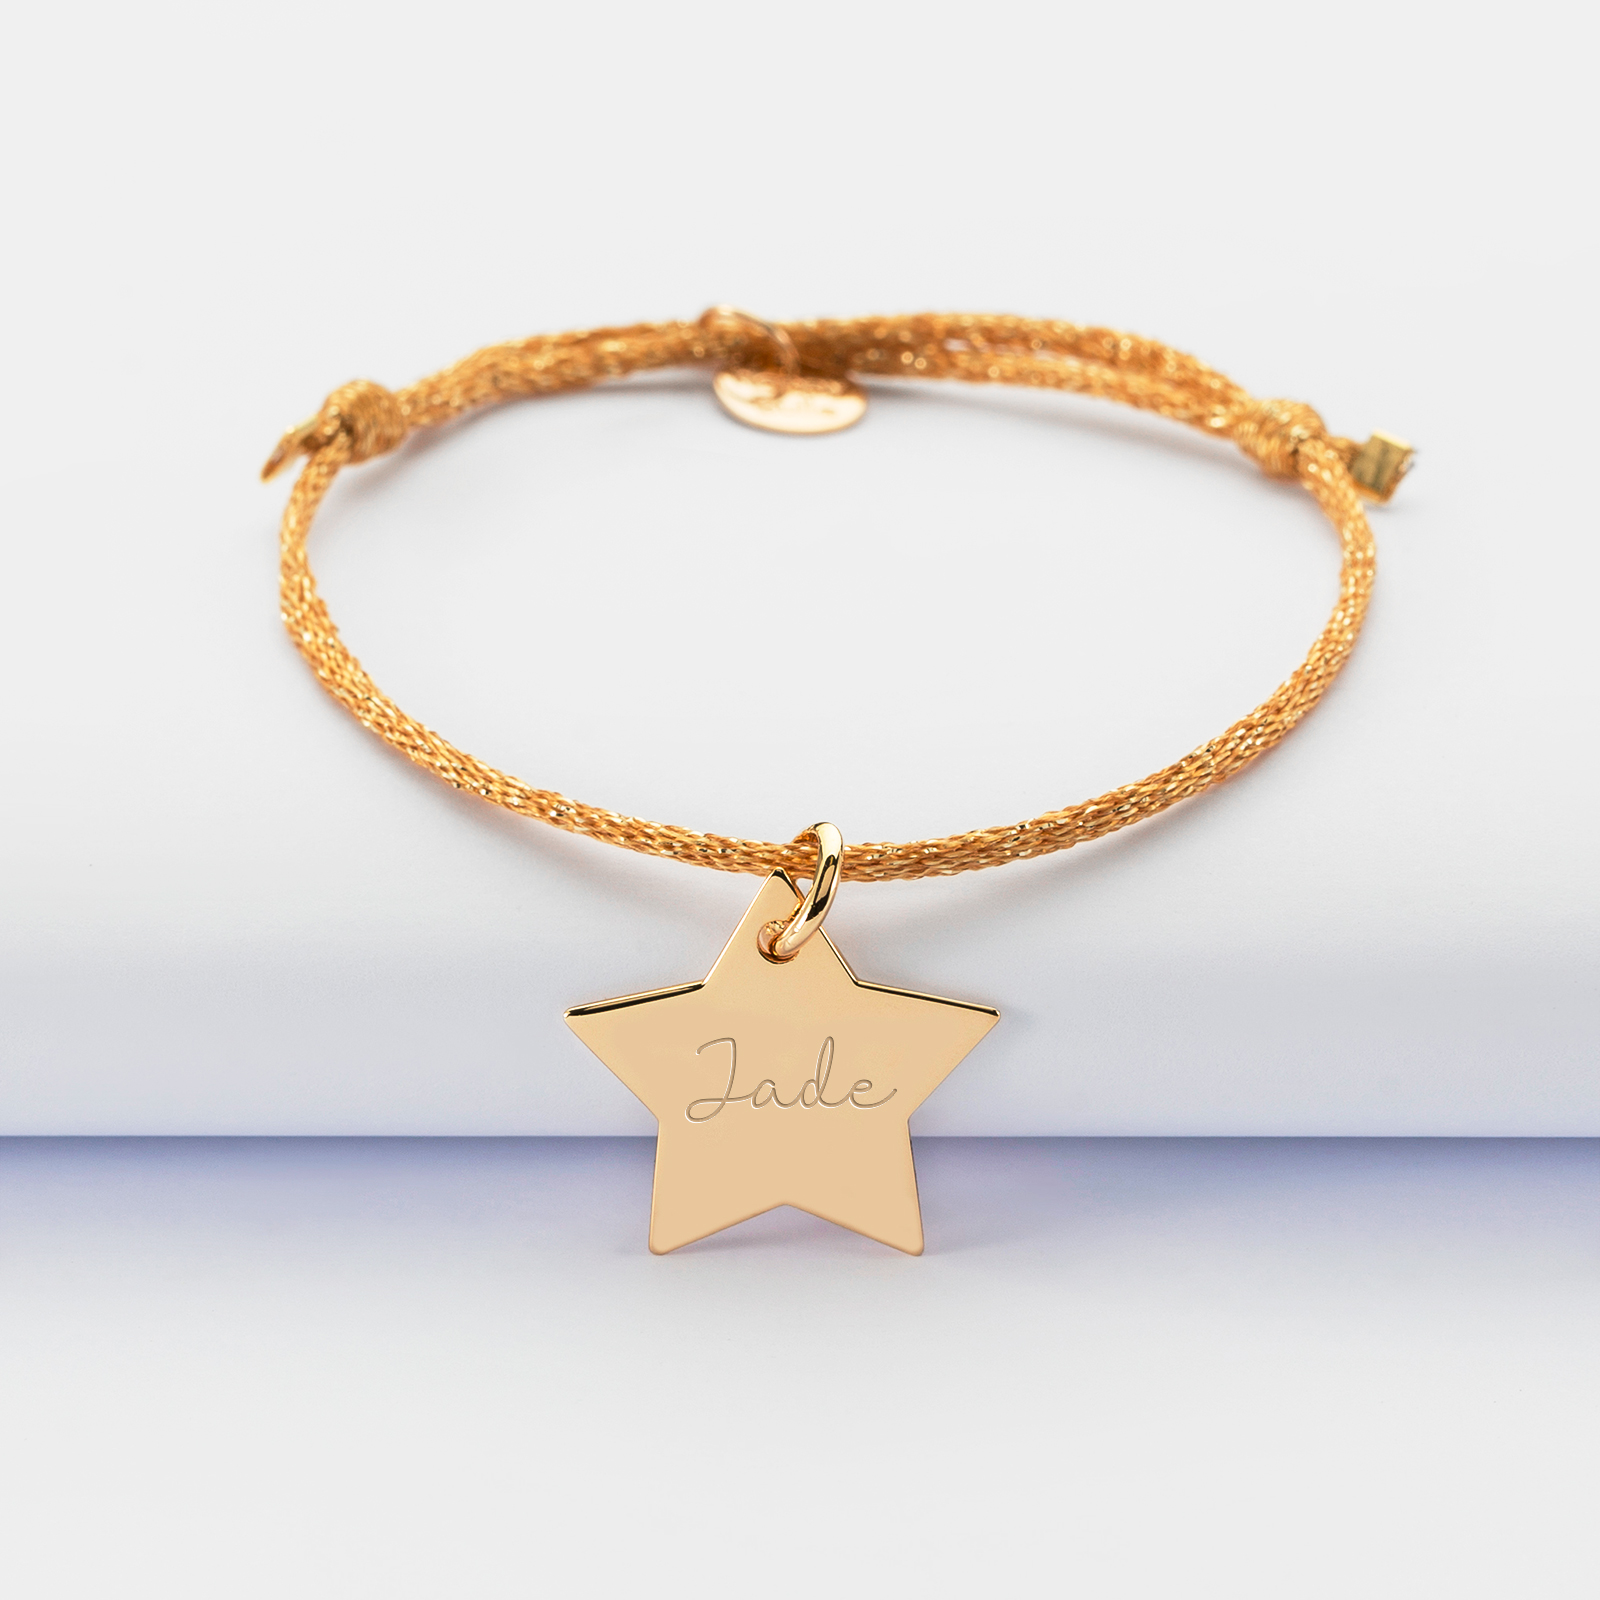 Personalised engraved gold plated star sparkly cord children's bracelet medallion 20x20mm - name